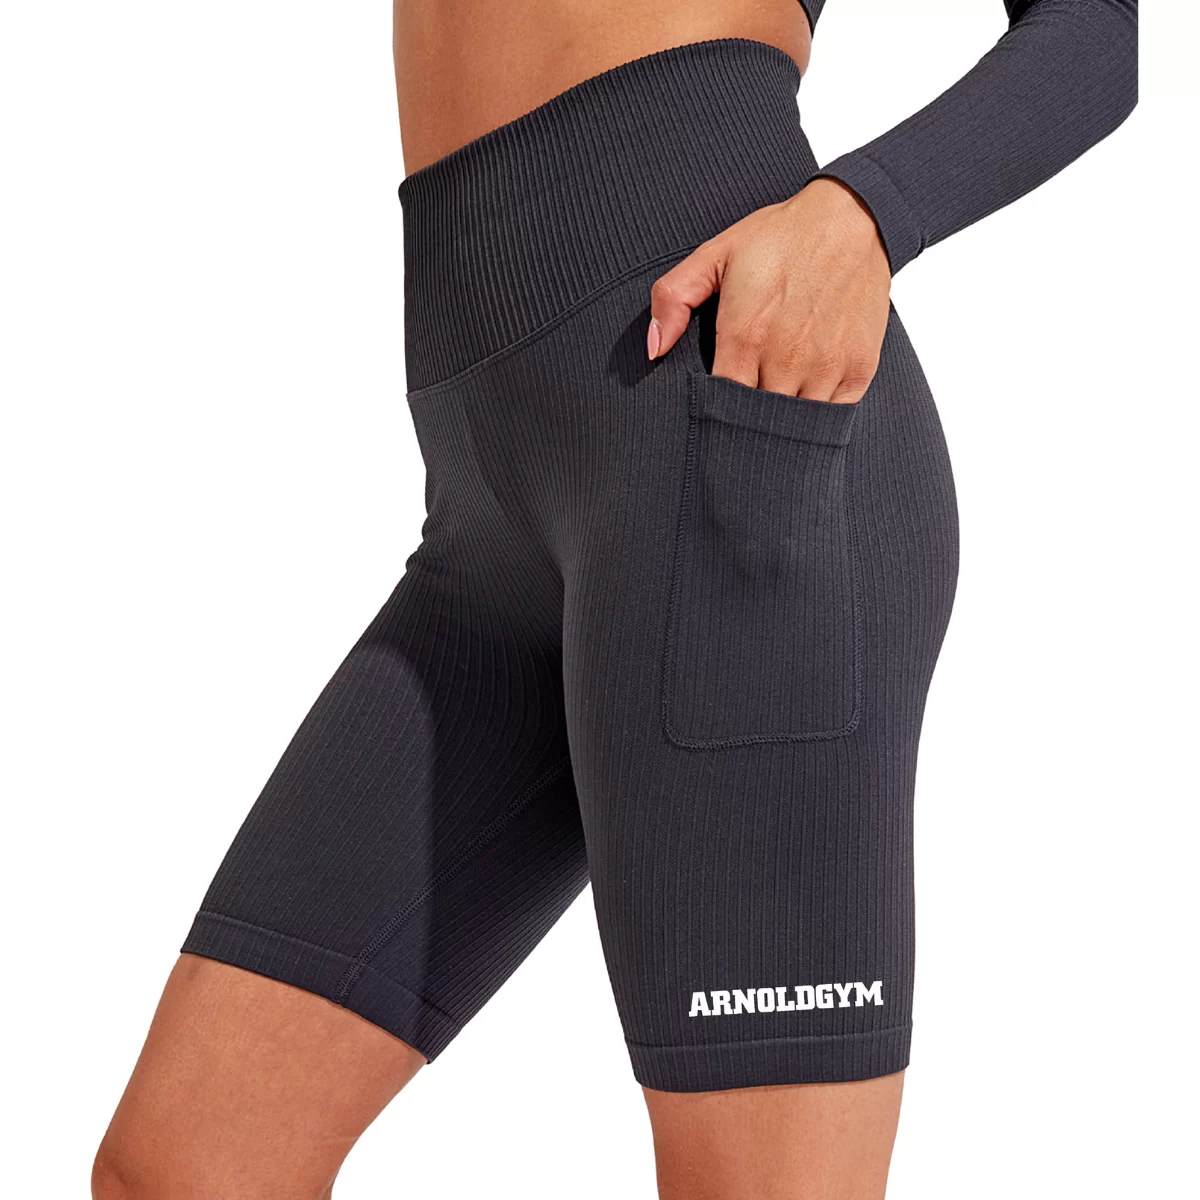 https://www.arnoldgymgear.com/wp-content/uploads/2022/01/womens-shorts-arnold-gym-charcoal-.webp